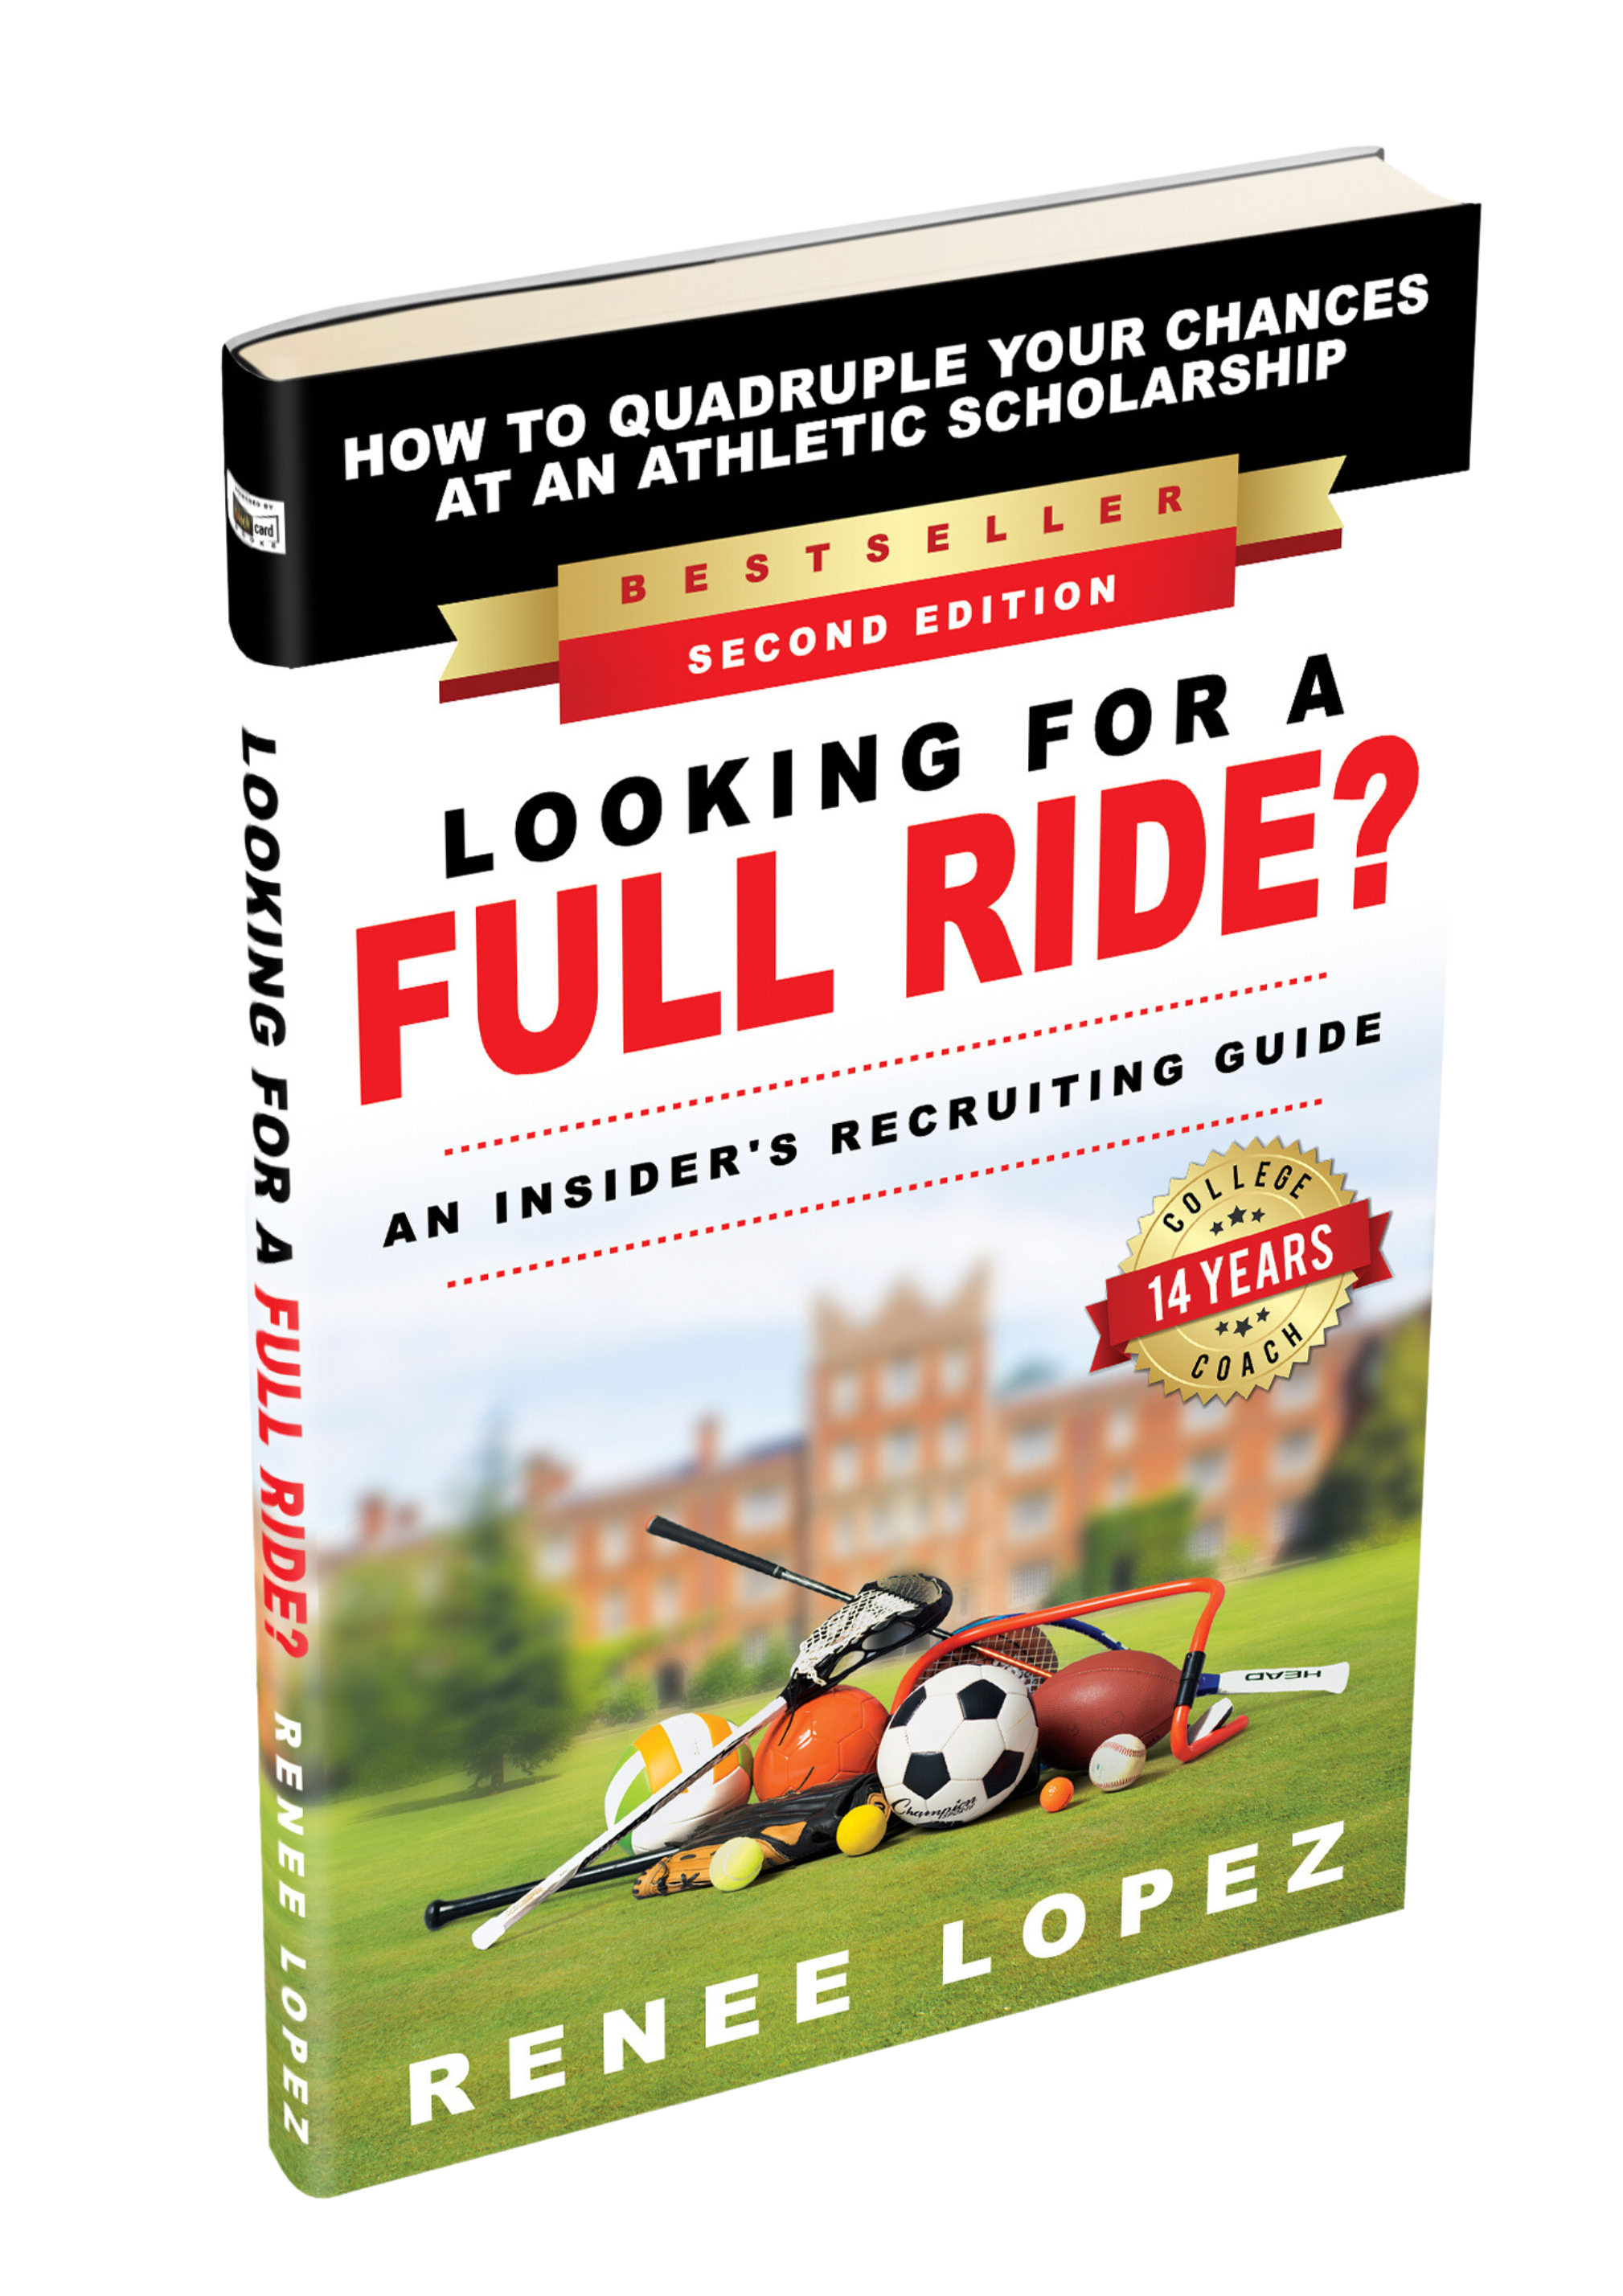 Looking For A Full Ride? - Recruiting, Seminars & Consulting - Coach Renee Lopez